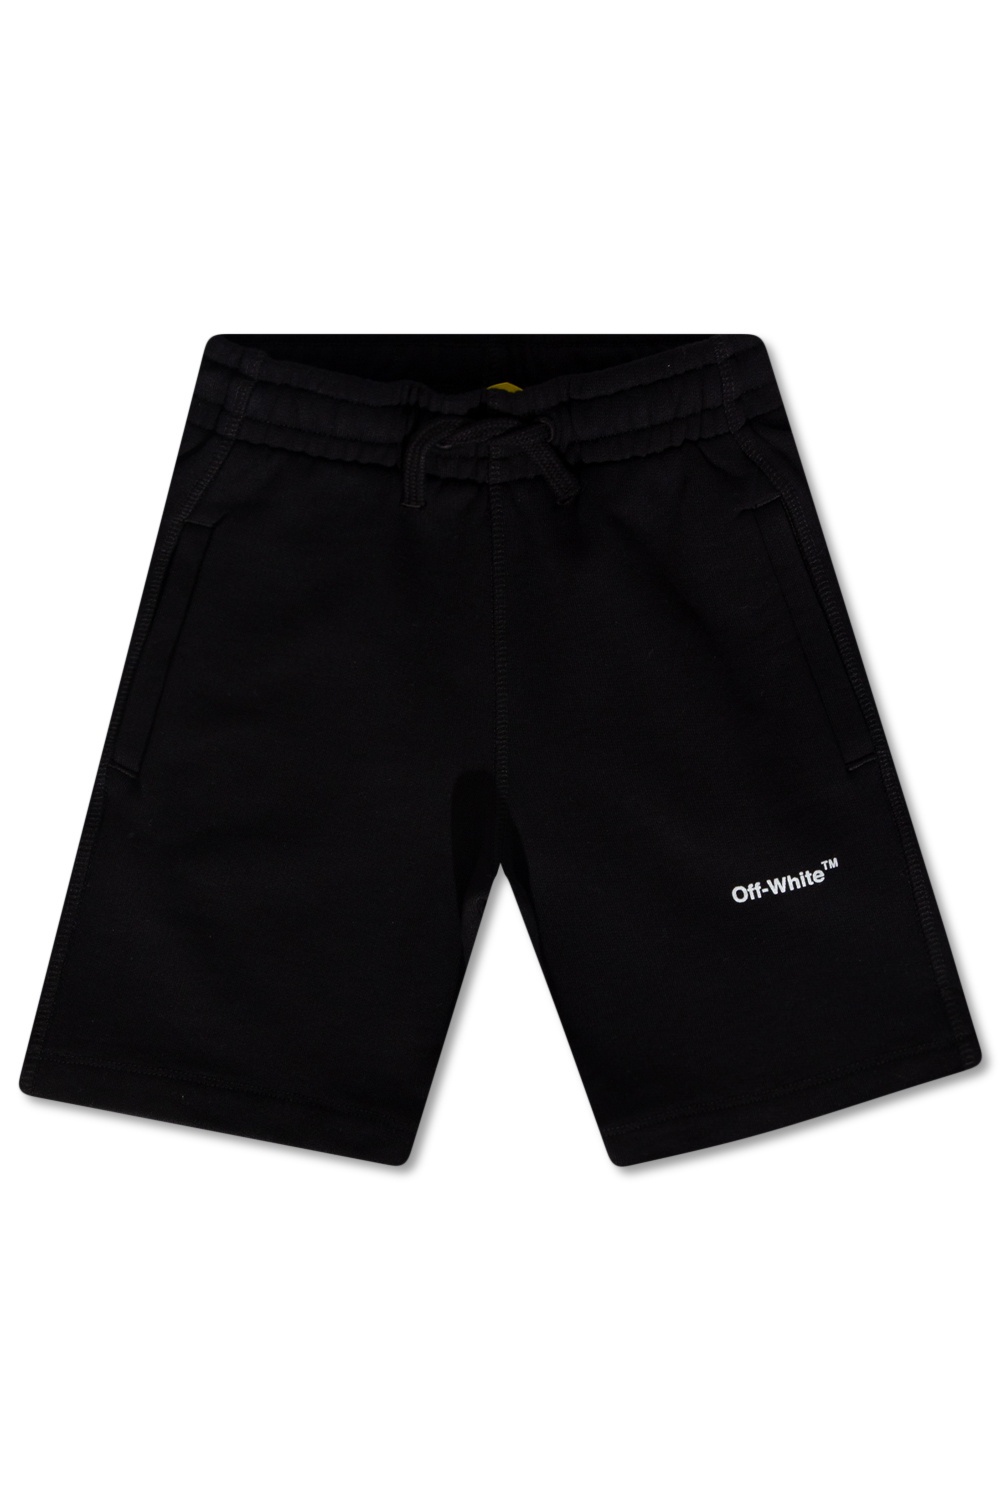 Off-White Kids Sustainable New balance Relentless 8 Fitted Short Pants